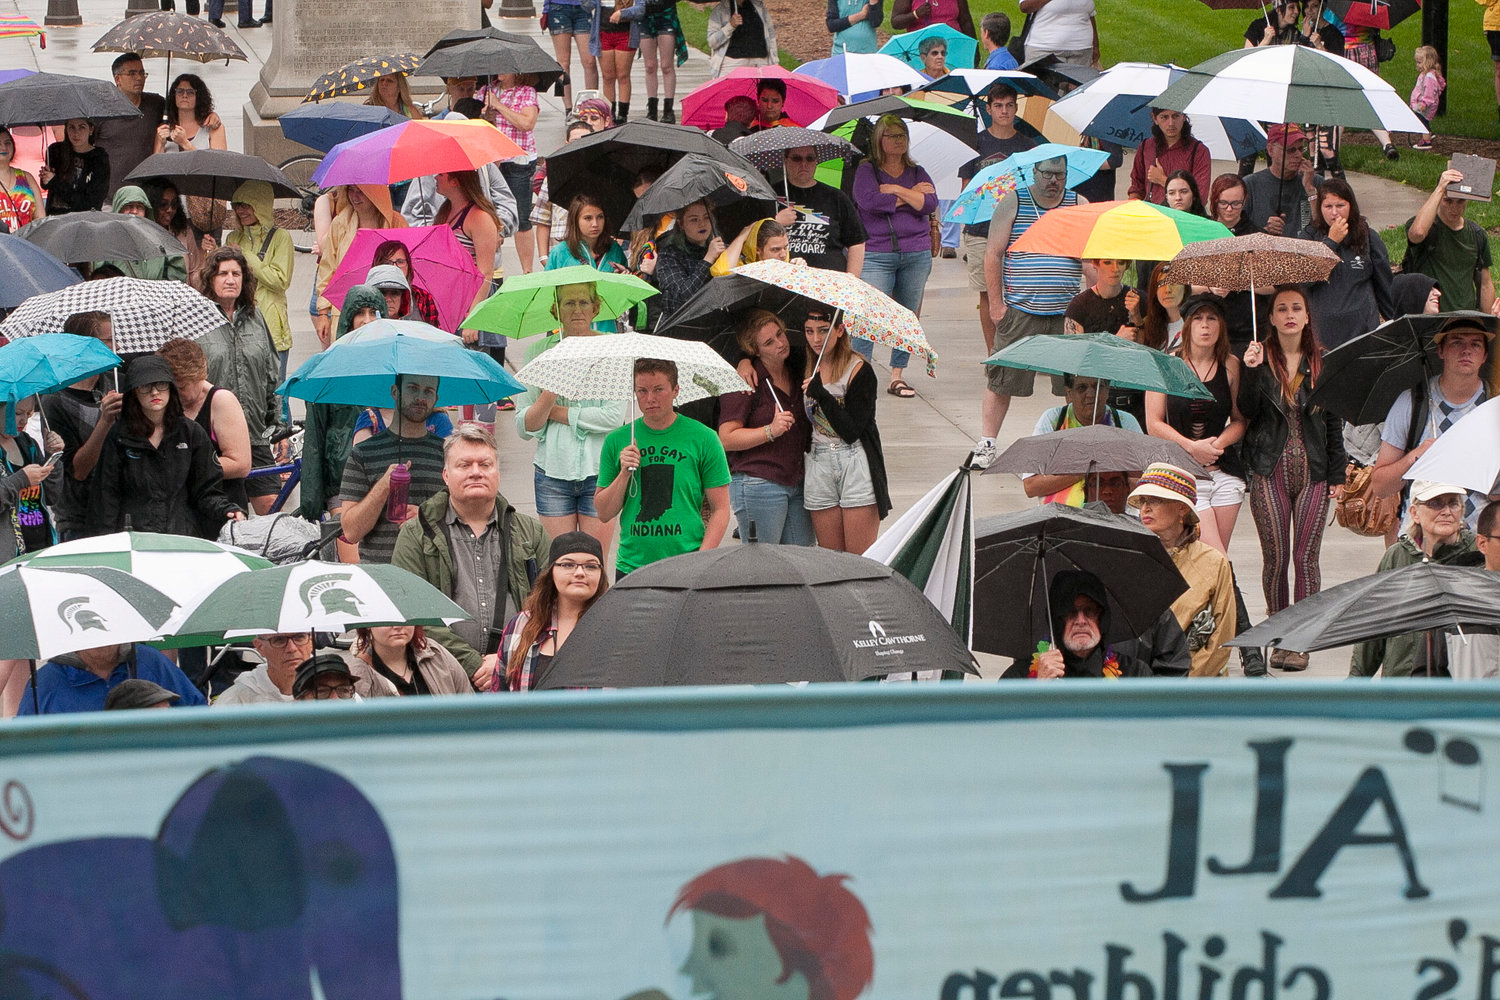 “Rain or shine, we gather, we sing, we fight for the continued advancement of Human Rights.”